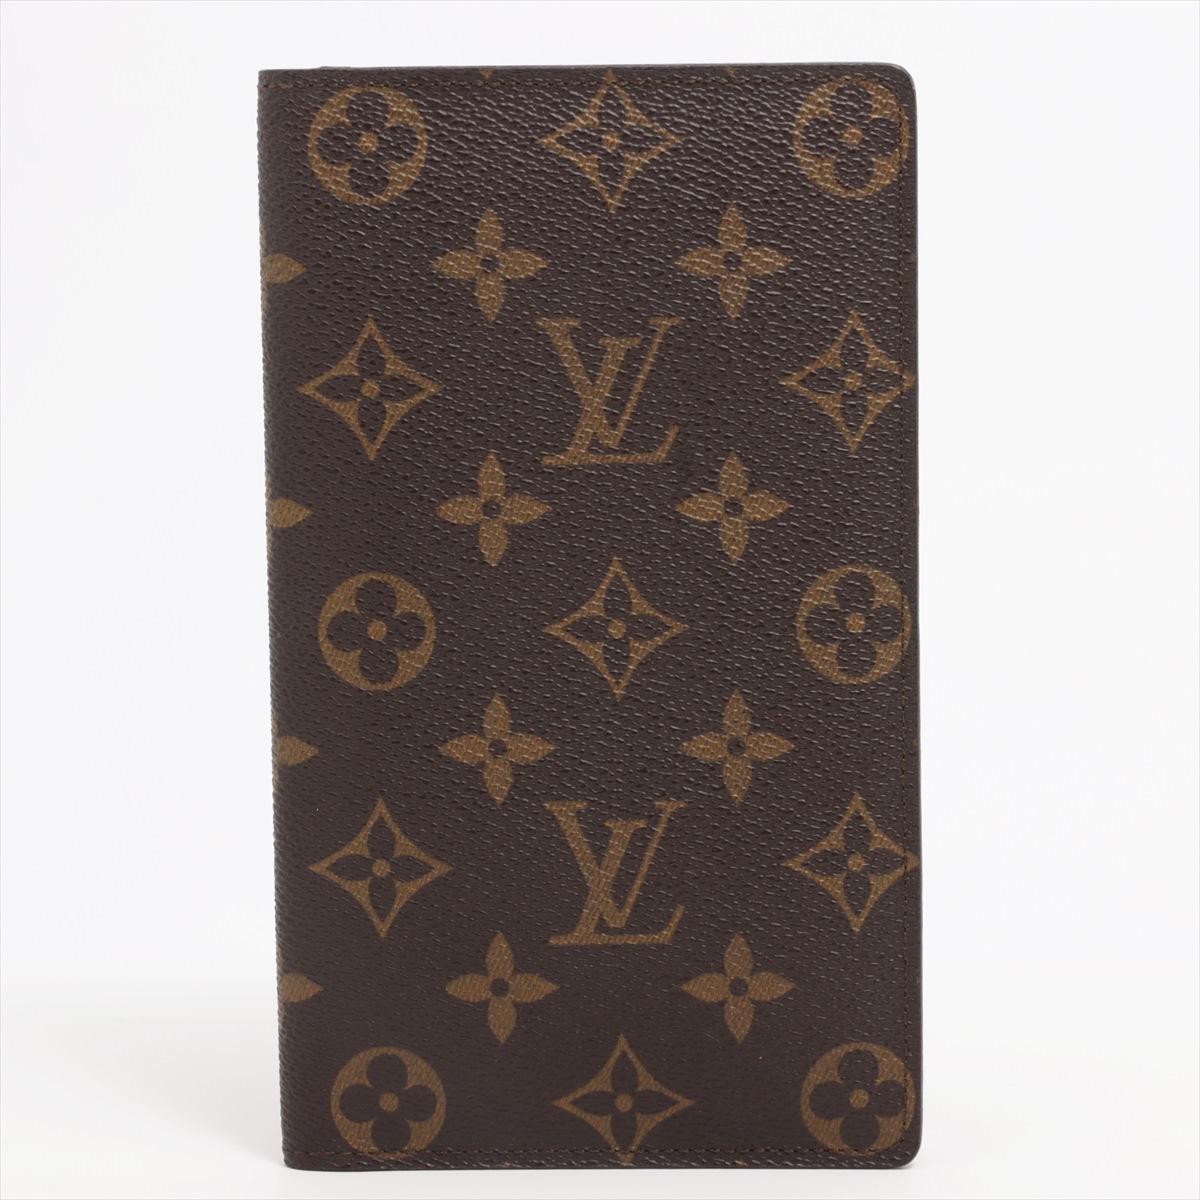 The Louis Vuitton Monogram Credit Bill Long Wallet in classic brown embodies the epitome of luxury and sophistication. Crafted from the iconic LV monogram canvas, the wallet showcases Louis Vuitton's renowned craftsmanship and heritage. Its